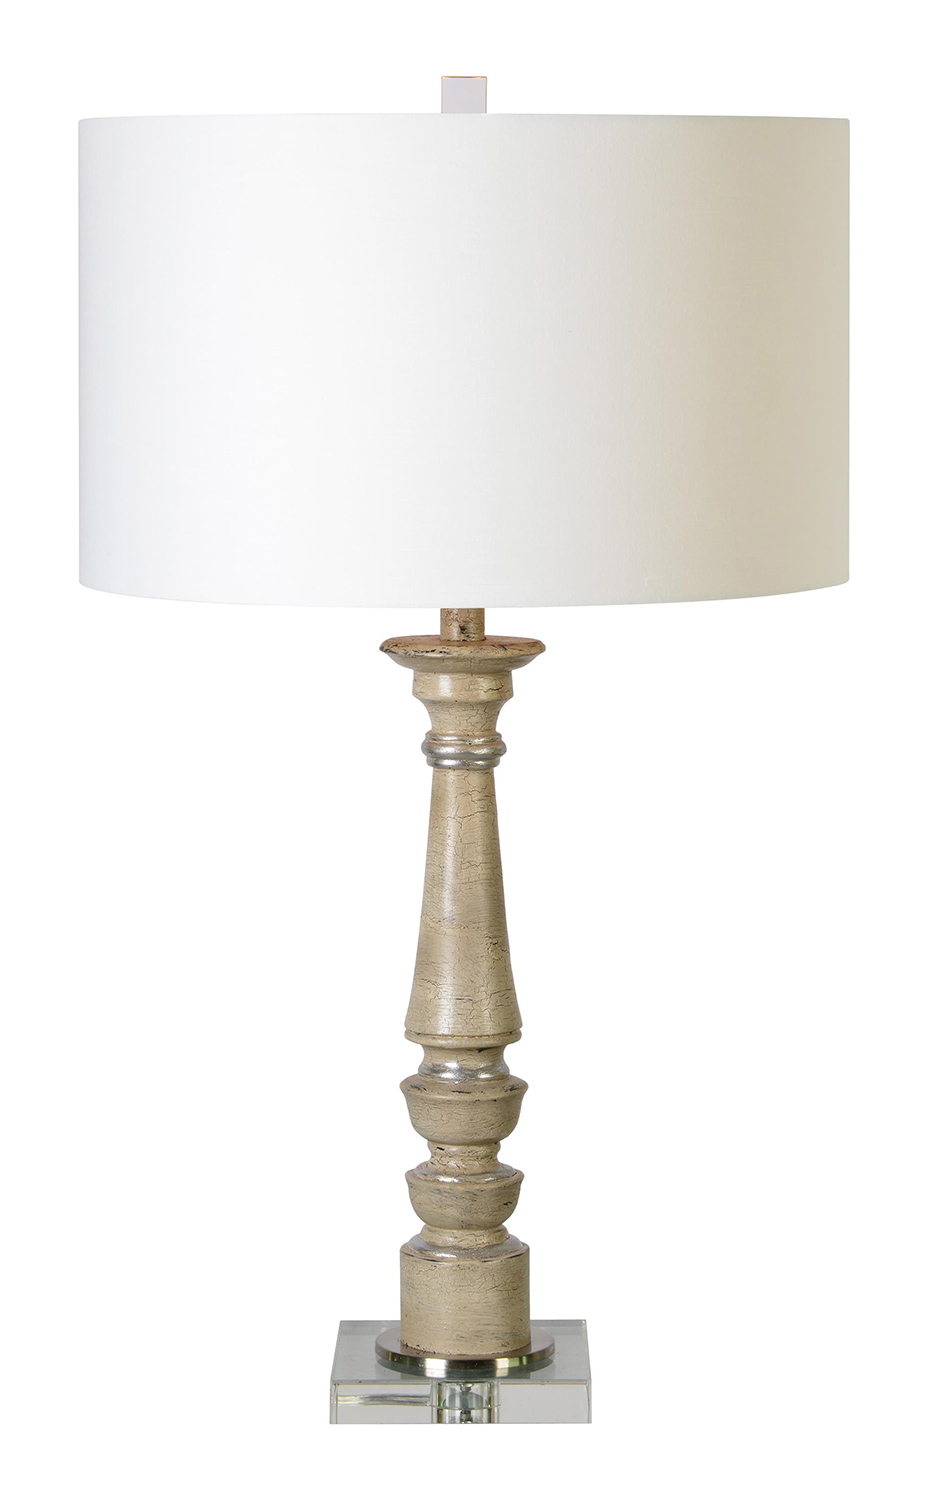 Ren-Wil Baluster Table Lamp - Antique White